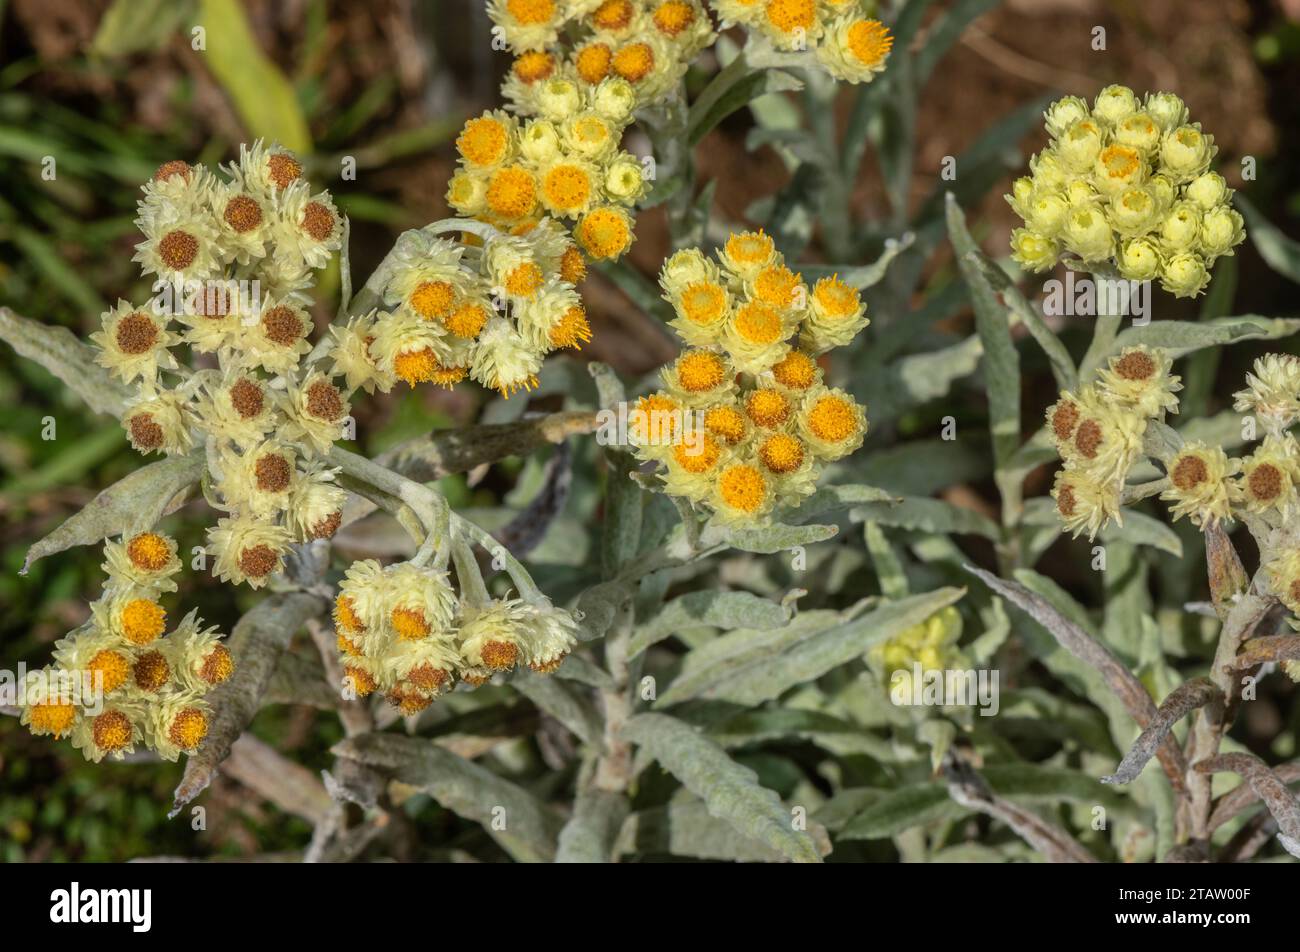 An Everlasting, Helichrysum bellum, in the Drakensberg Mountains, South Africa. Stock Photo